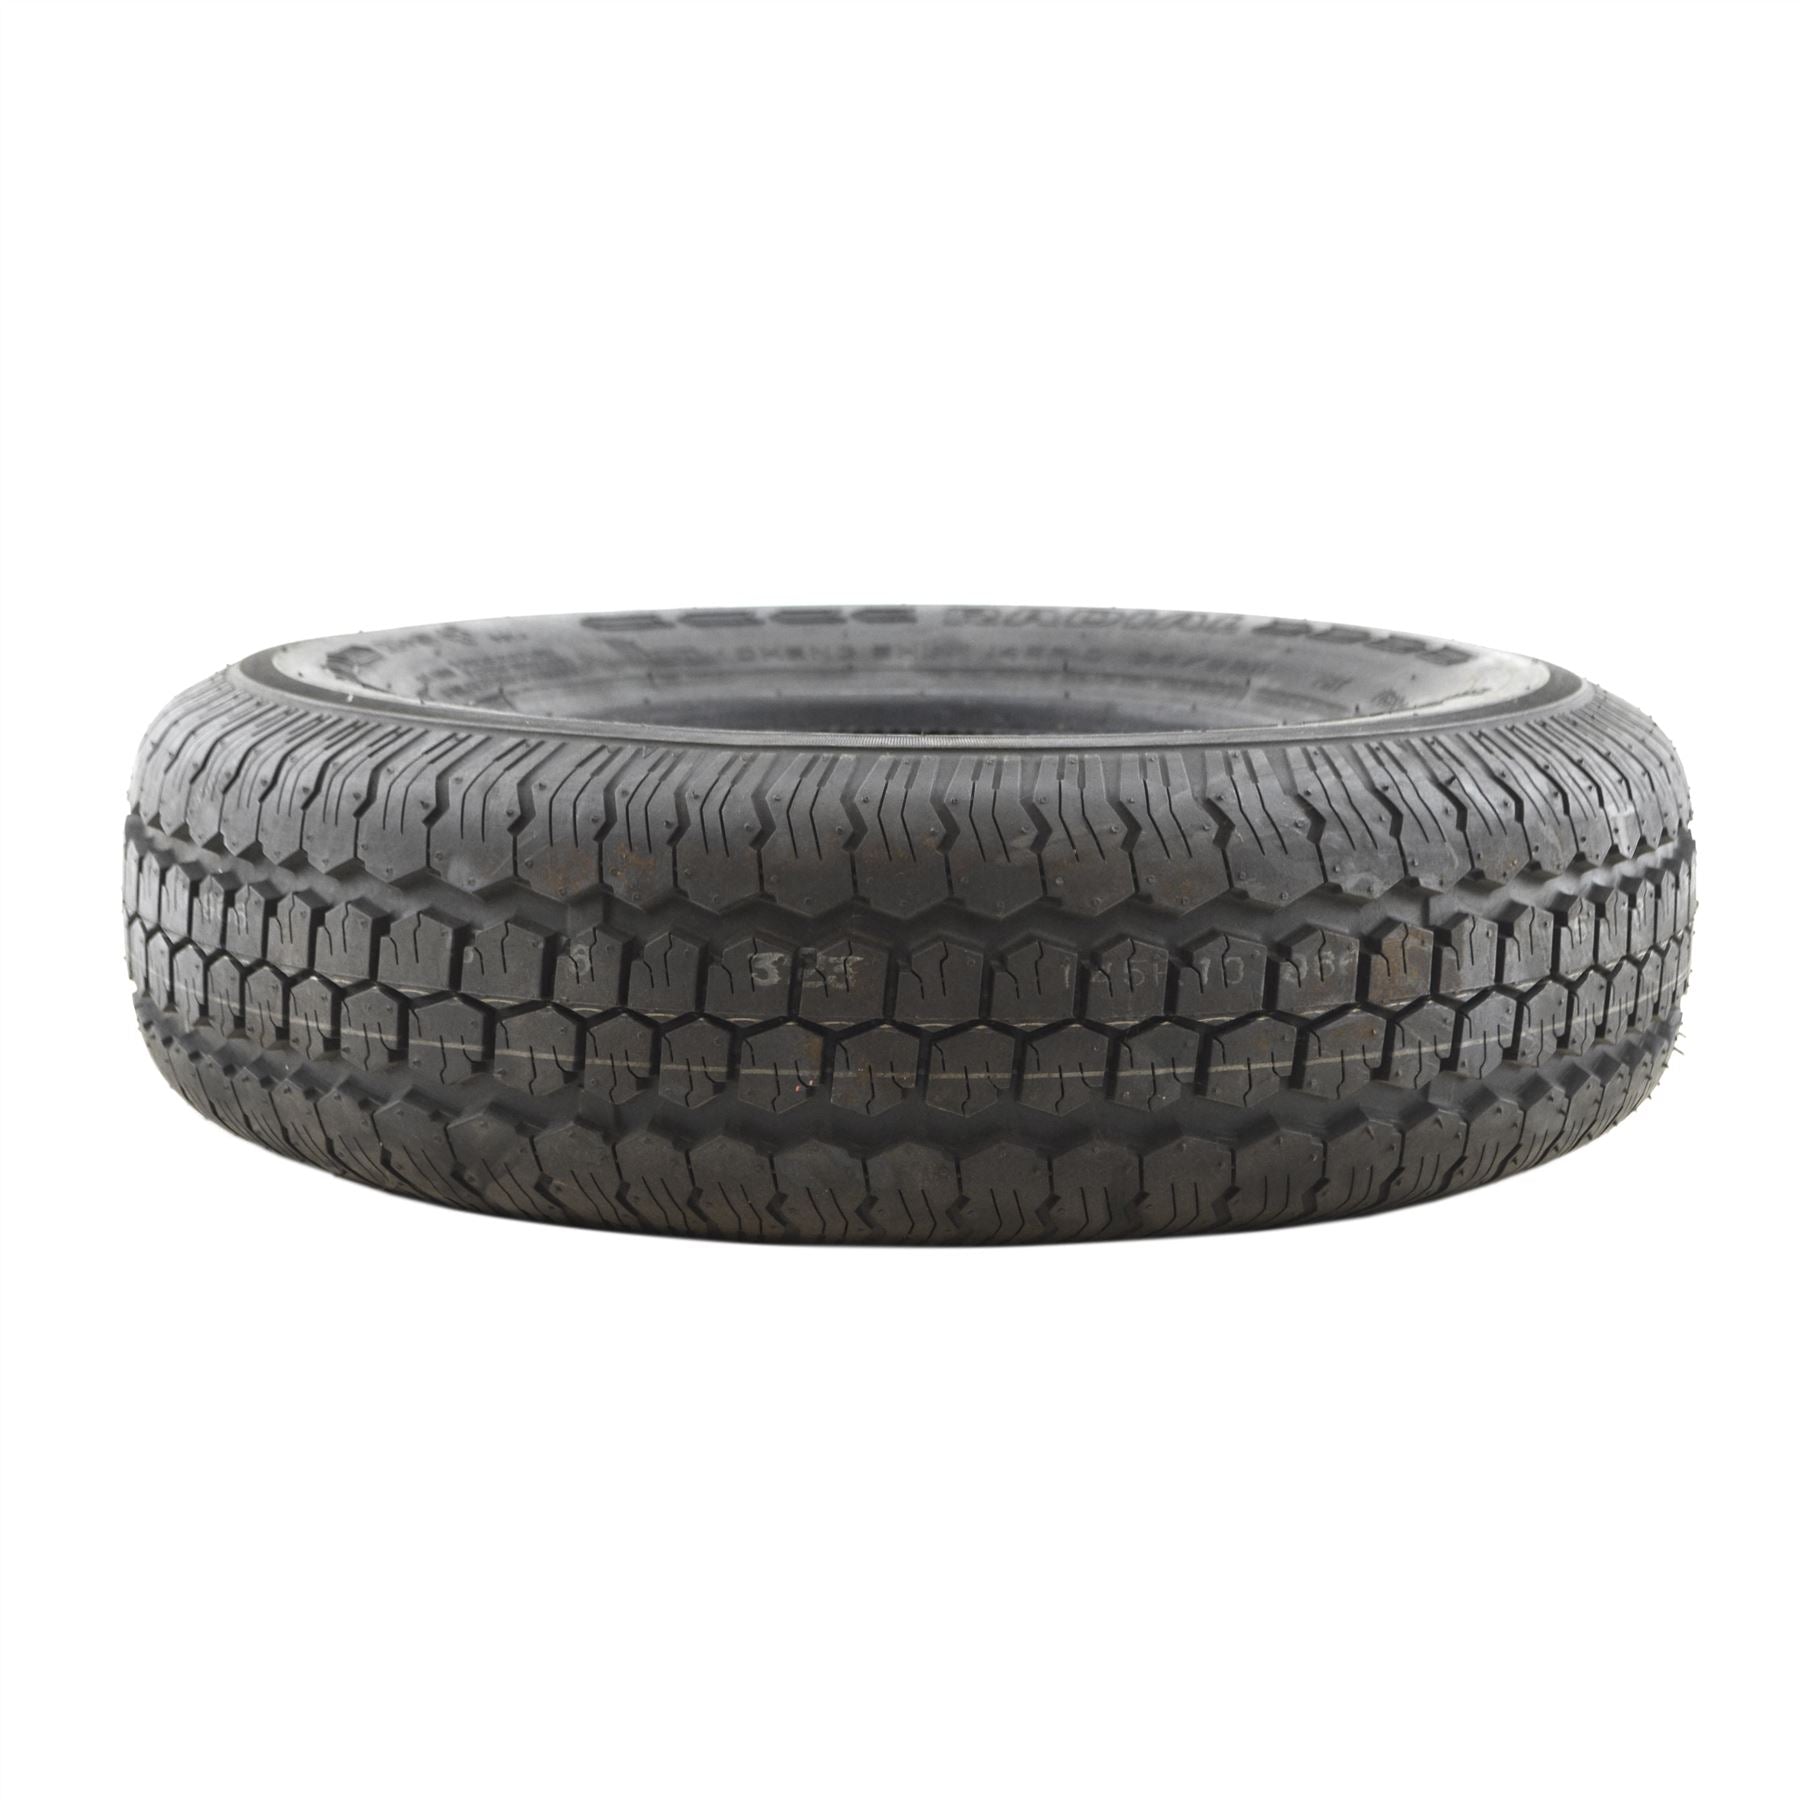 145 R10 Trailer Tyre Tire Only 84/82N Radial Tubeless 500kg Max 8 PLY TRSP23